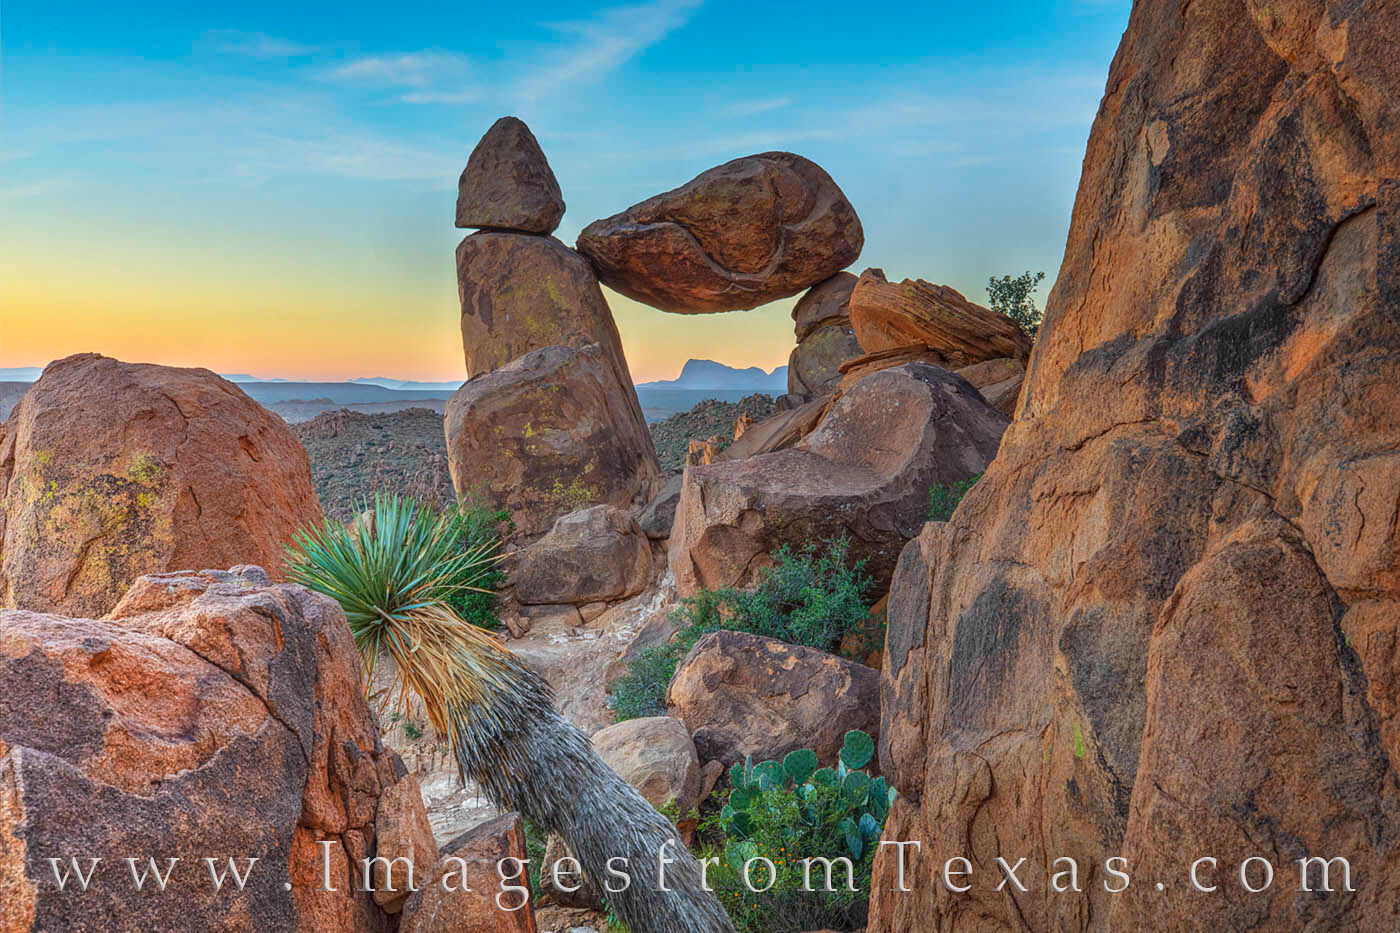 Yucca, cacti, yellow flowers, and Balanced Rock make for a nice photograph in the cool morning light in November.